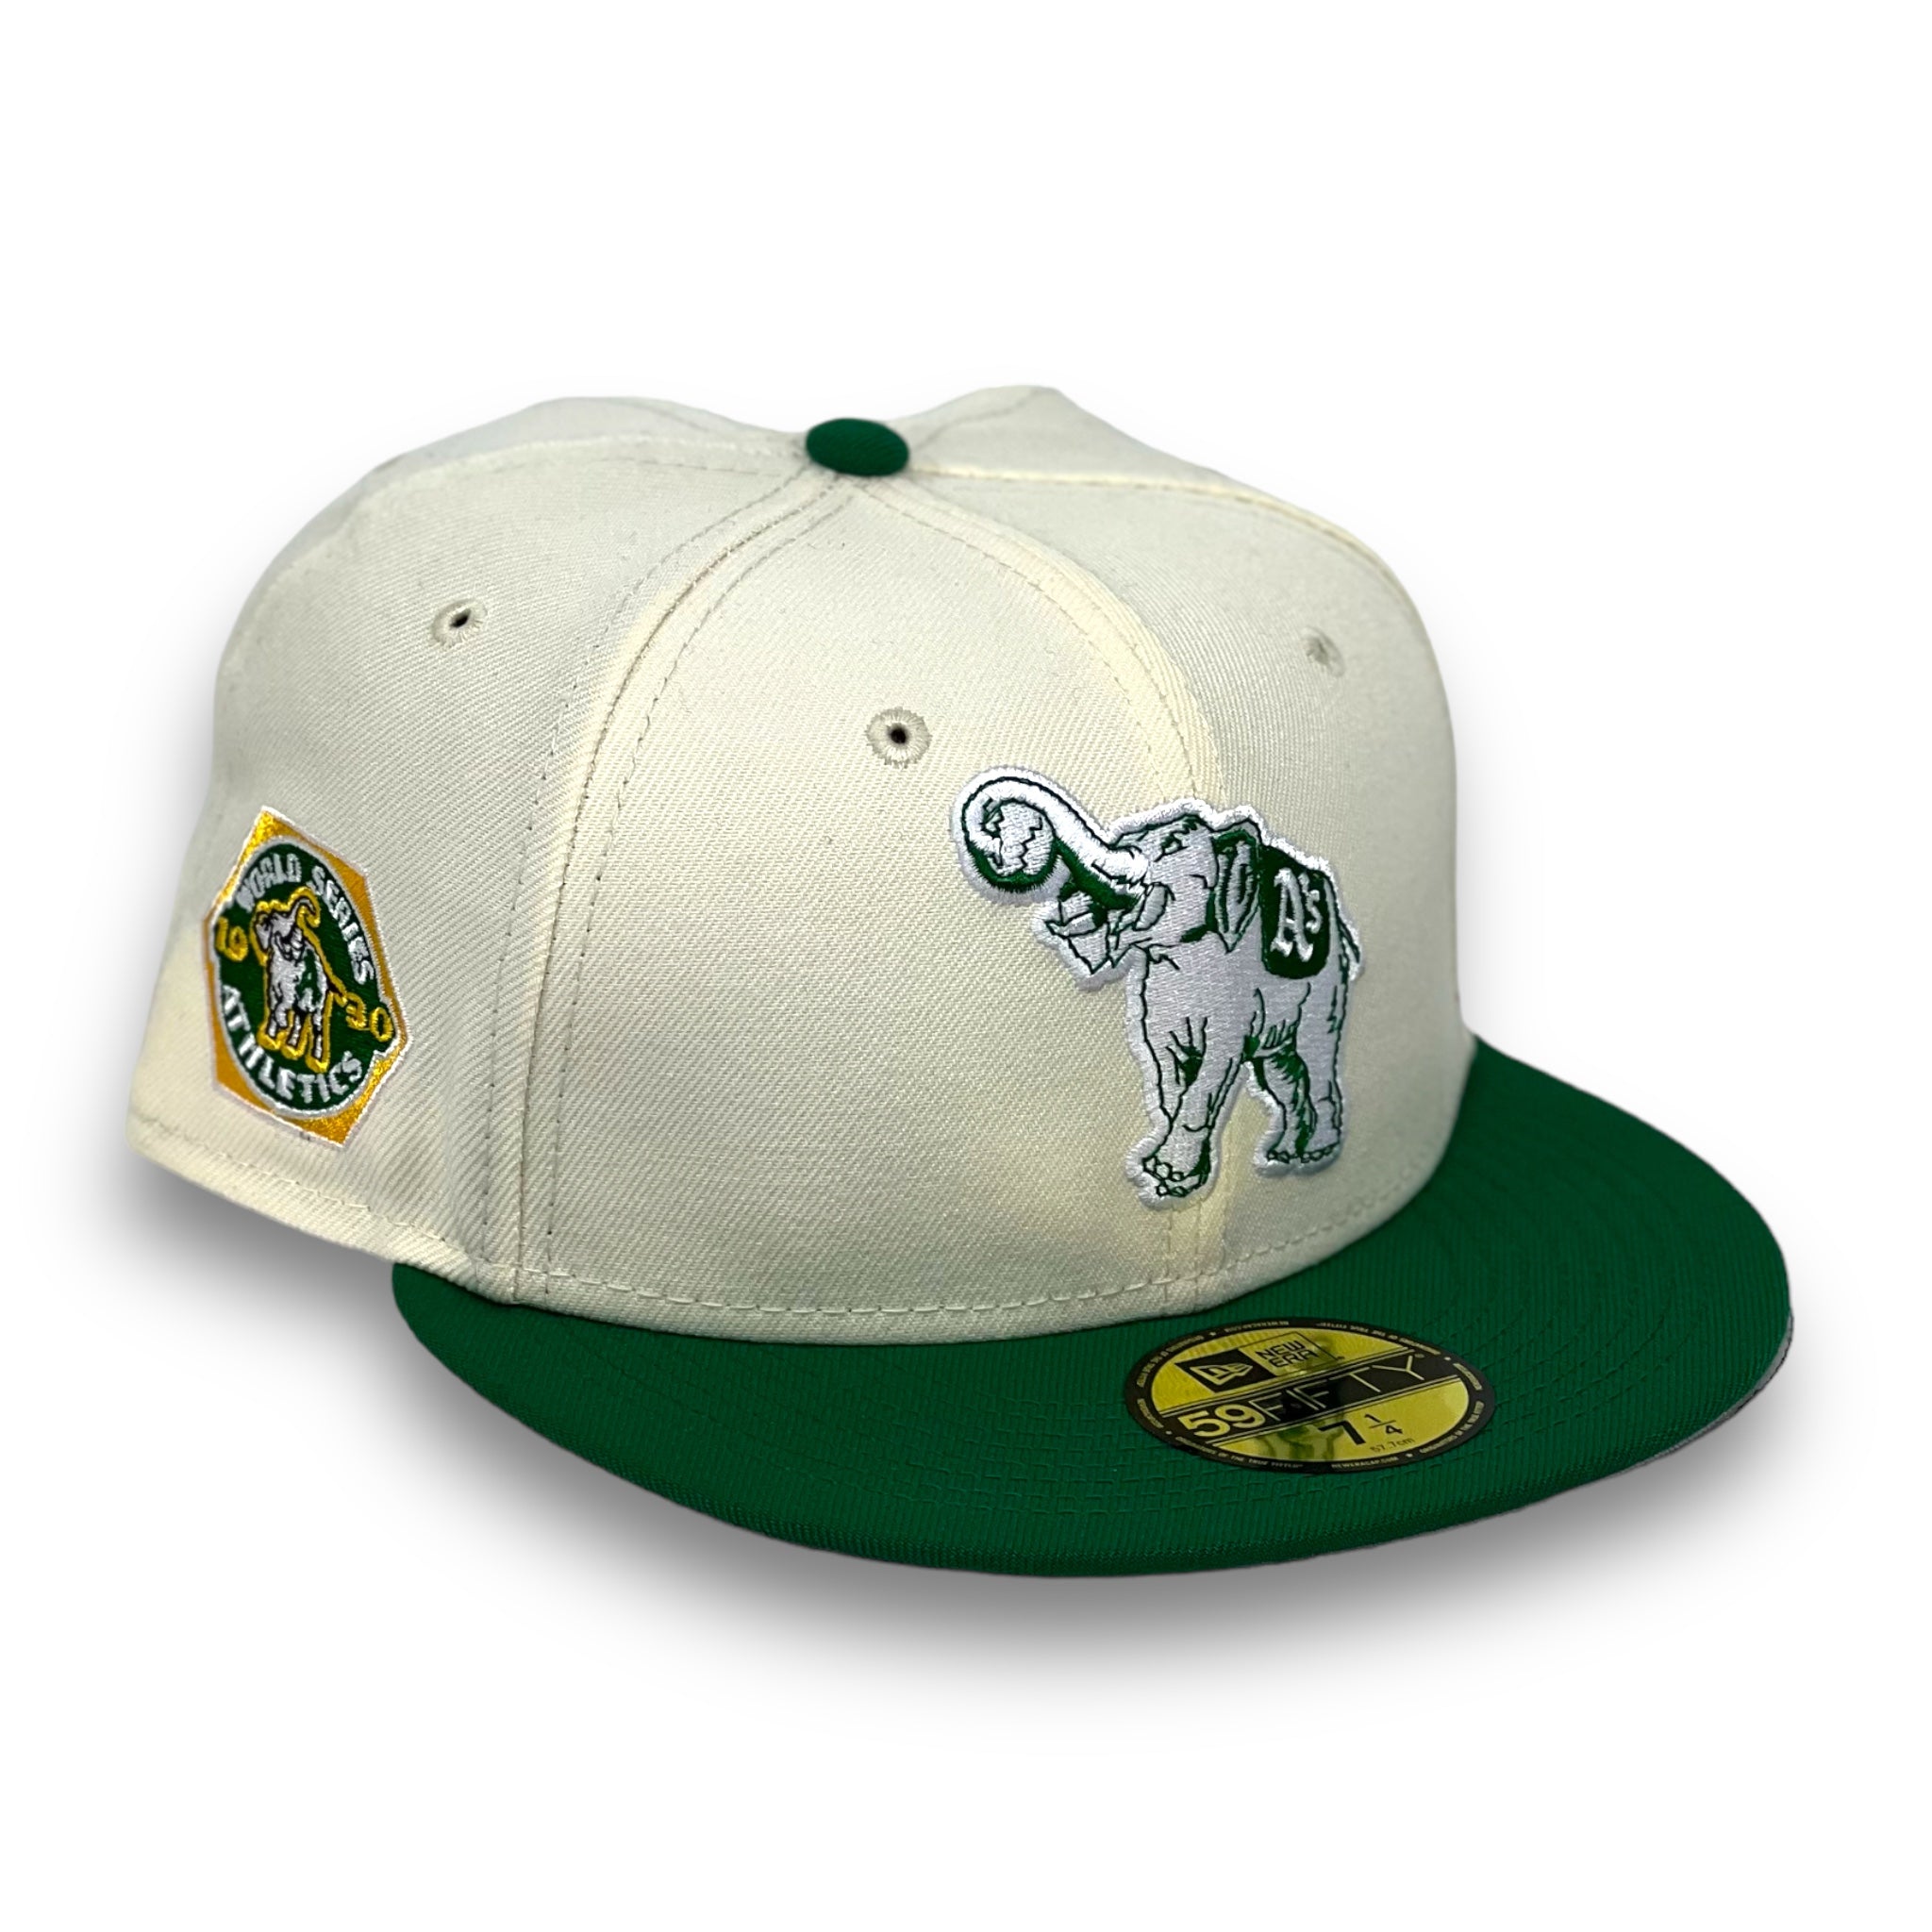 OAKLAND ATHLETICS (OFF-WHITE) (1930 WORLD SERIES) NEW ERA 59FIFTY FITTED